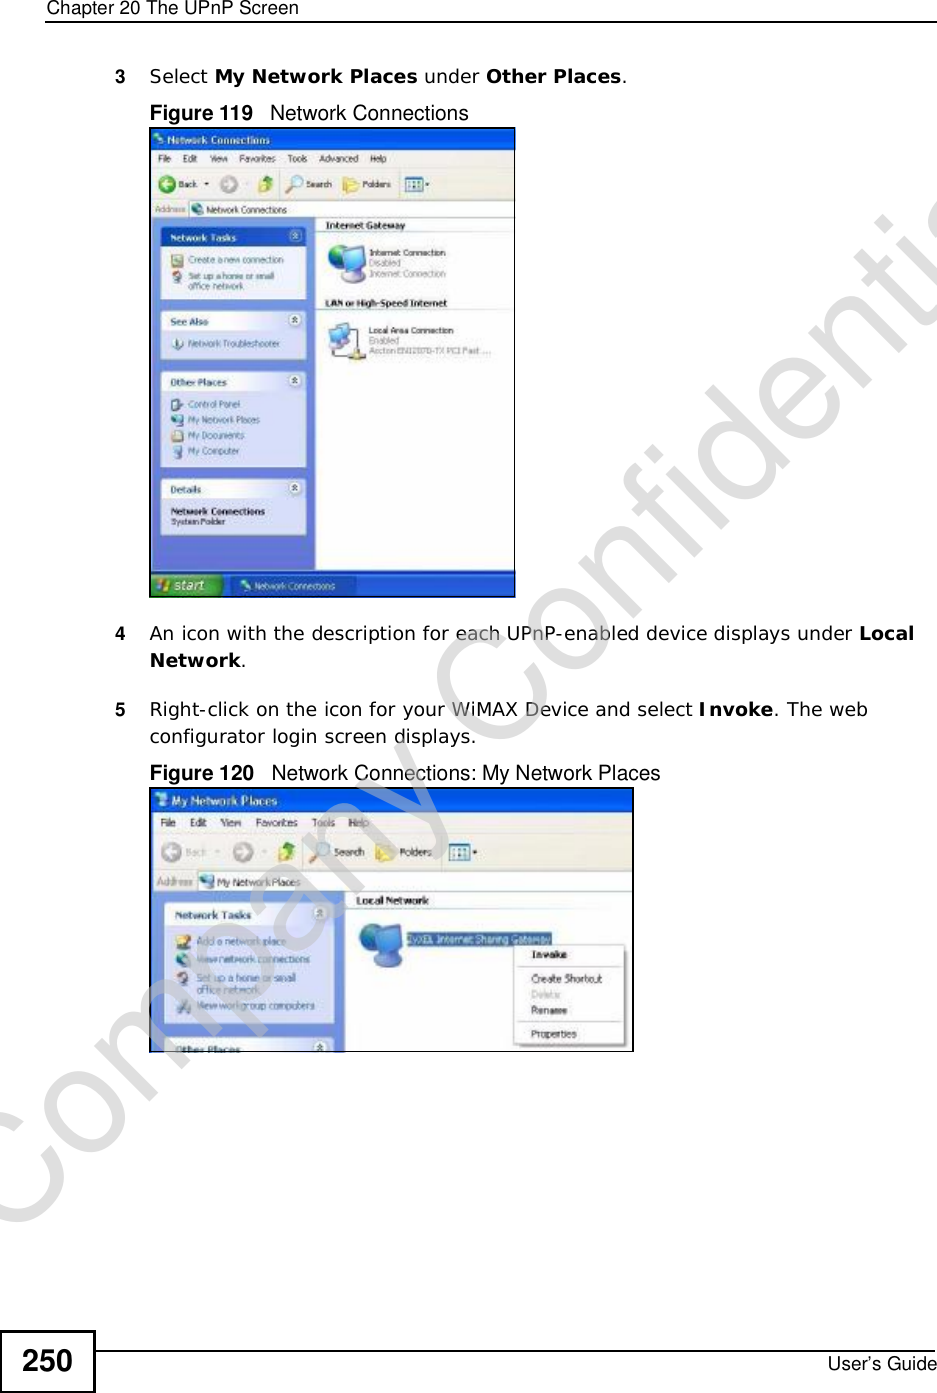 Chapter 20The UPnP ScreenUser’s Guide2503Select My Network Places under Other Places.Figure 119   Network Connections4An icon with the description for each UPnP-enabled device displays under LocalNetwork.5Right-click on the icon for your WiMAX Device and select Invoke. The web configurator login screen displays. Figure 120   Network Connections: My Network PlacesCompany Confidential